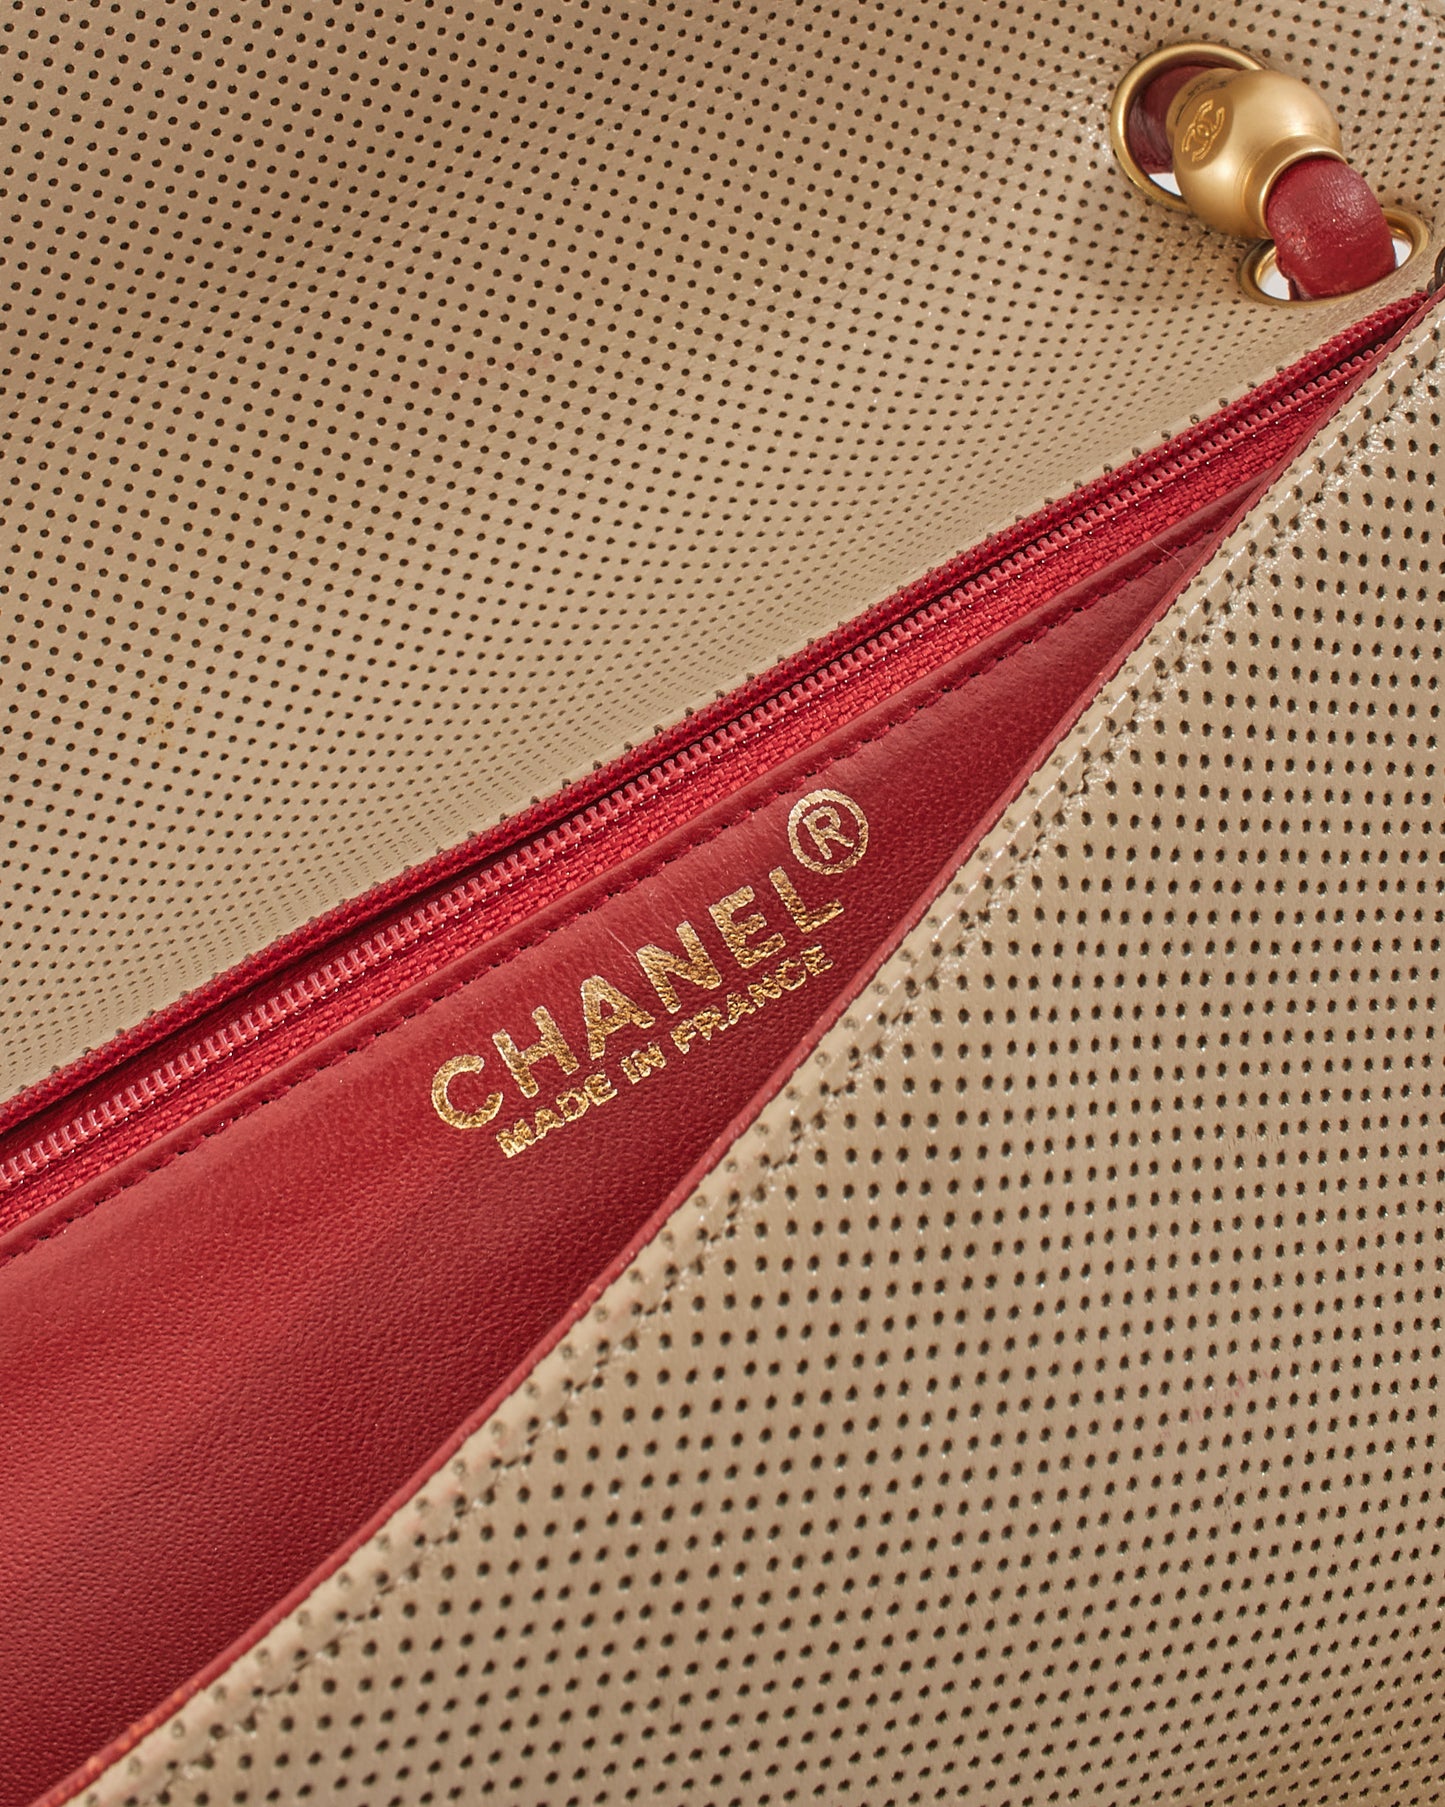 Chanel Vintage Beige/Red Perforated Leather Flap Bag with Gold Hardware